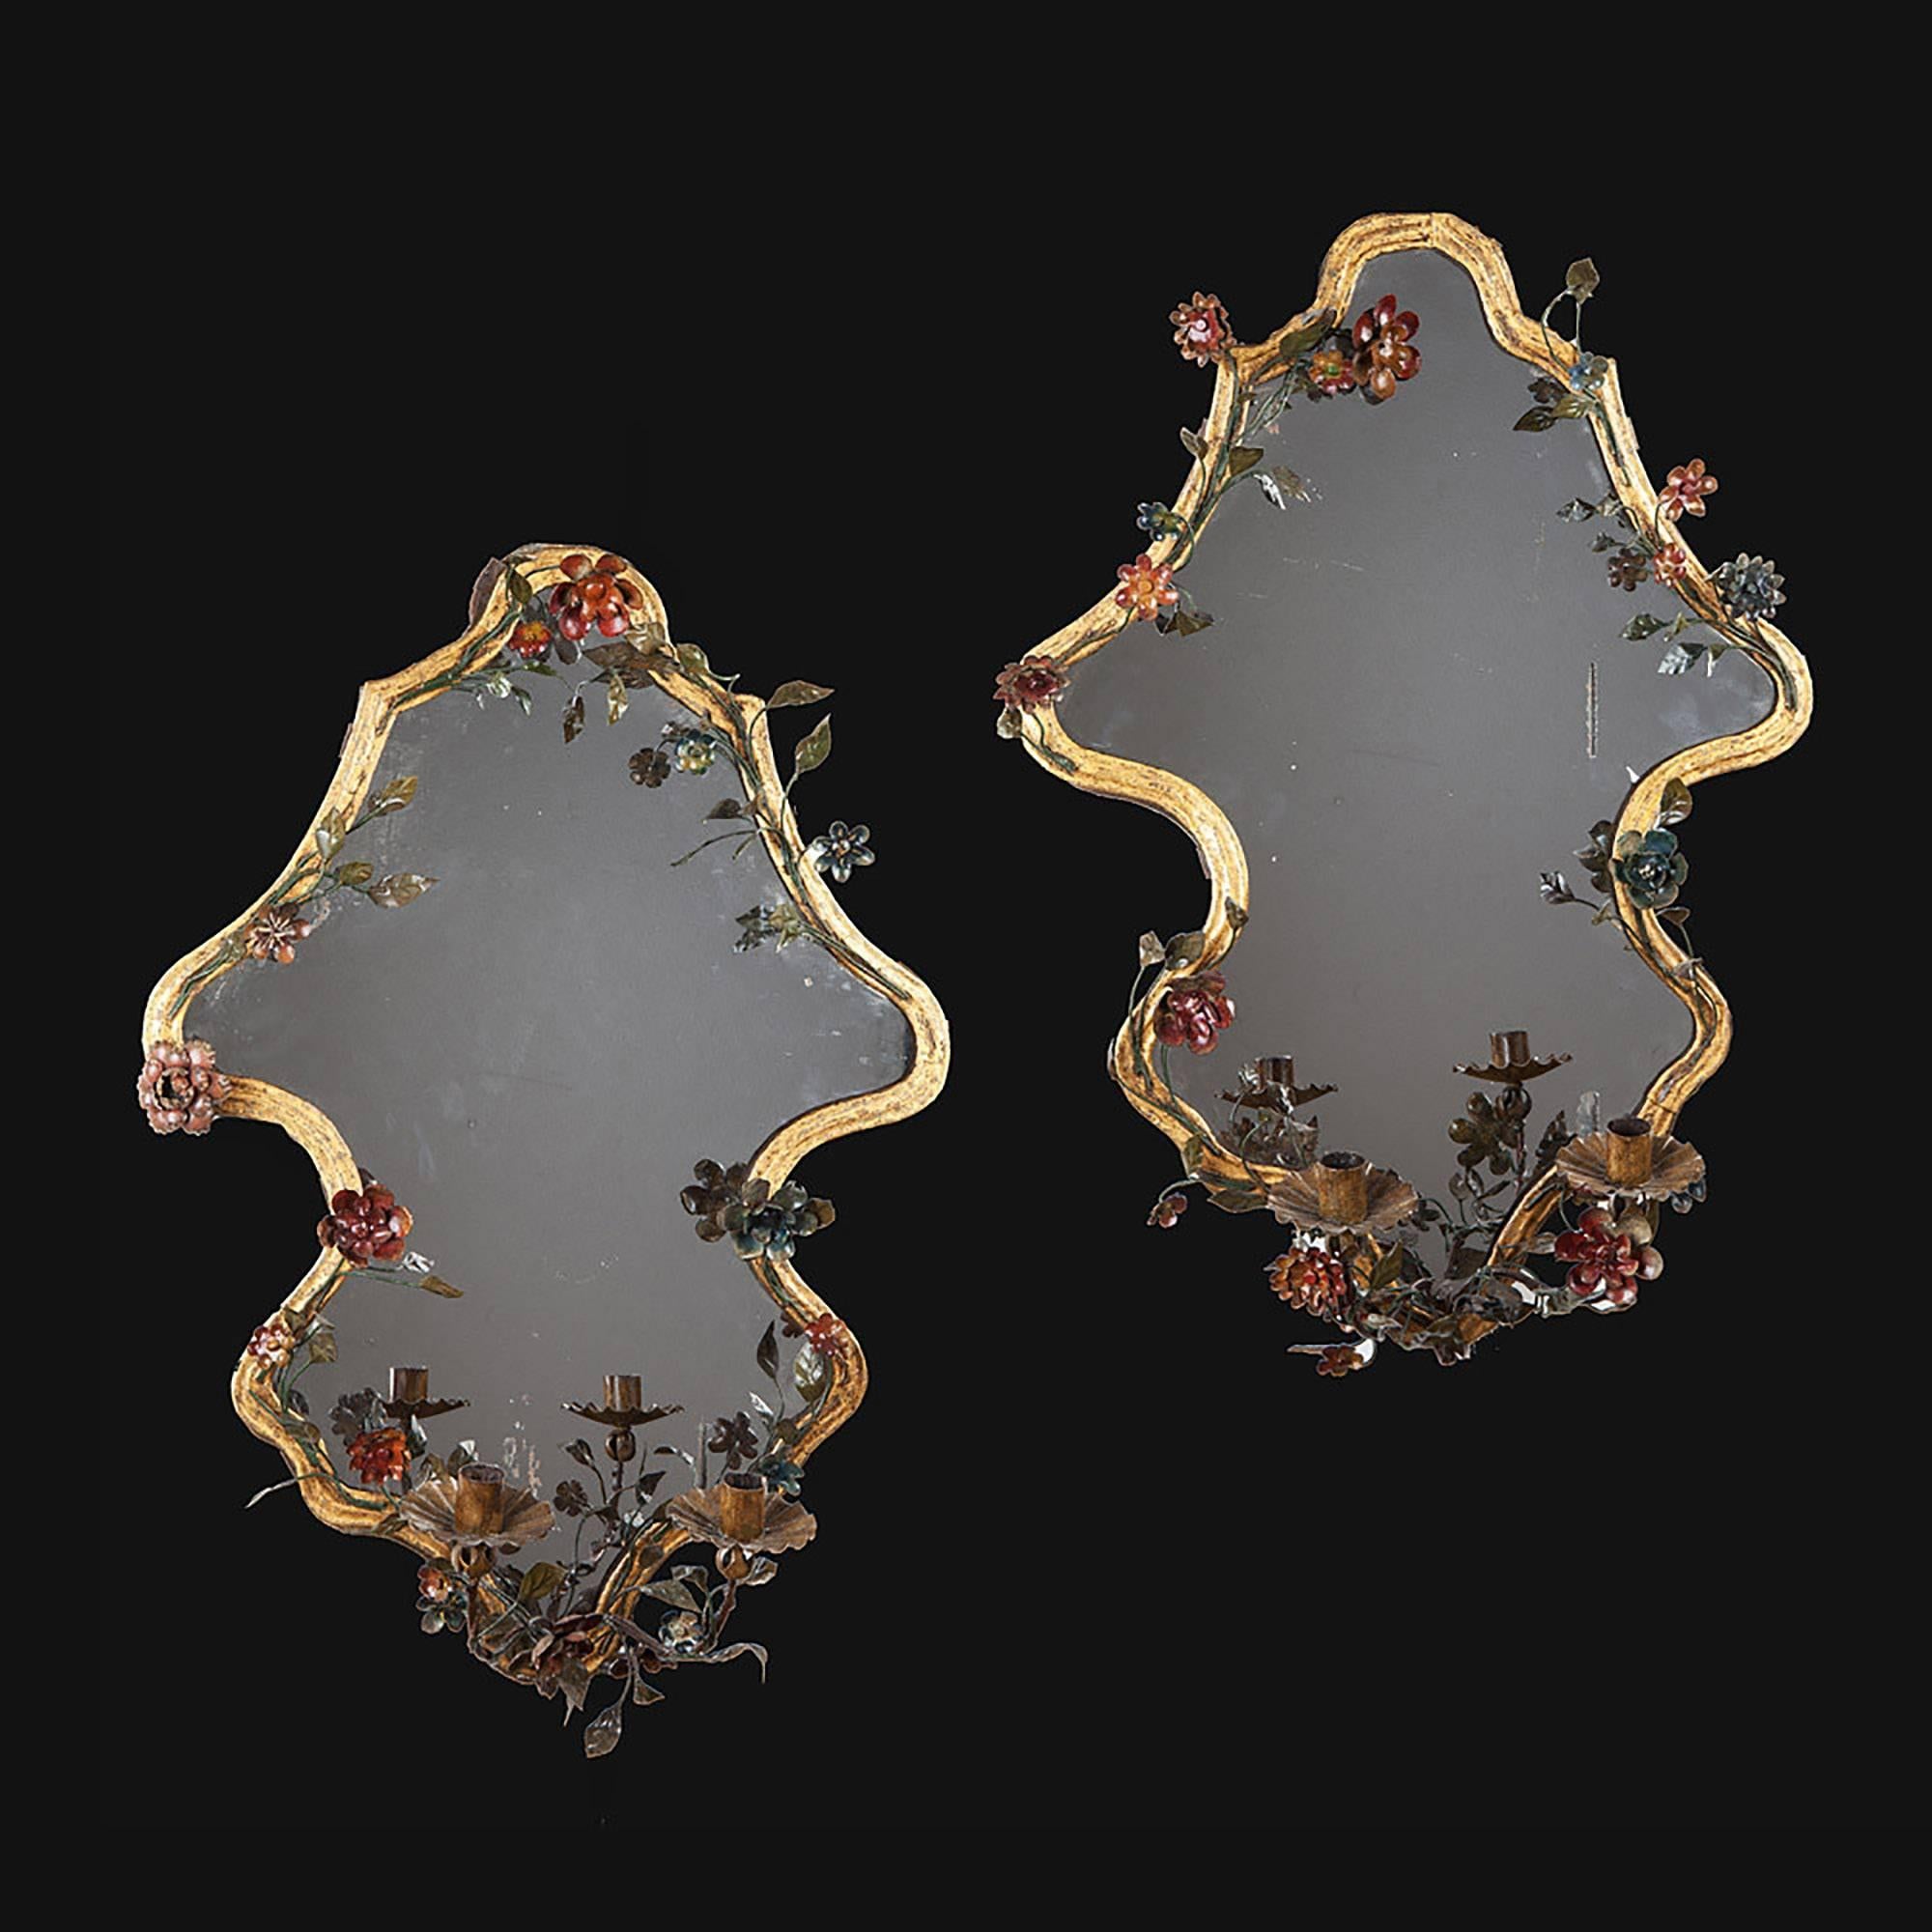 Northern Italy, circa 1840.

​A pair of Piedmontese elaborately shaped tôle girandoles with gilt borders mounted with polychrome flowers. Each retains its original two branch candle arms. 

Measures: Height 27.5 in (70 cm), width 20 in (51 cm).